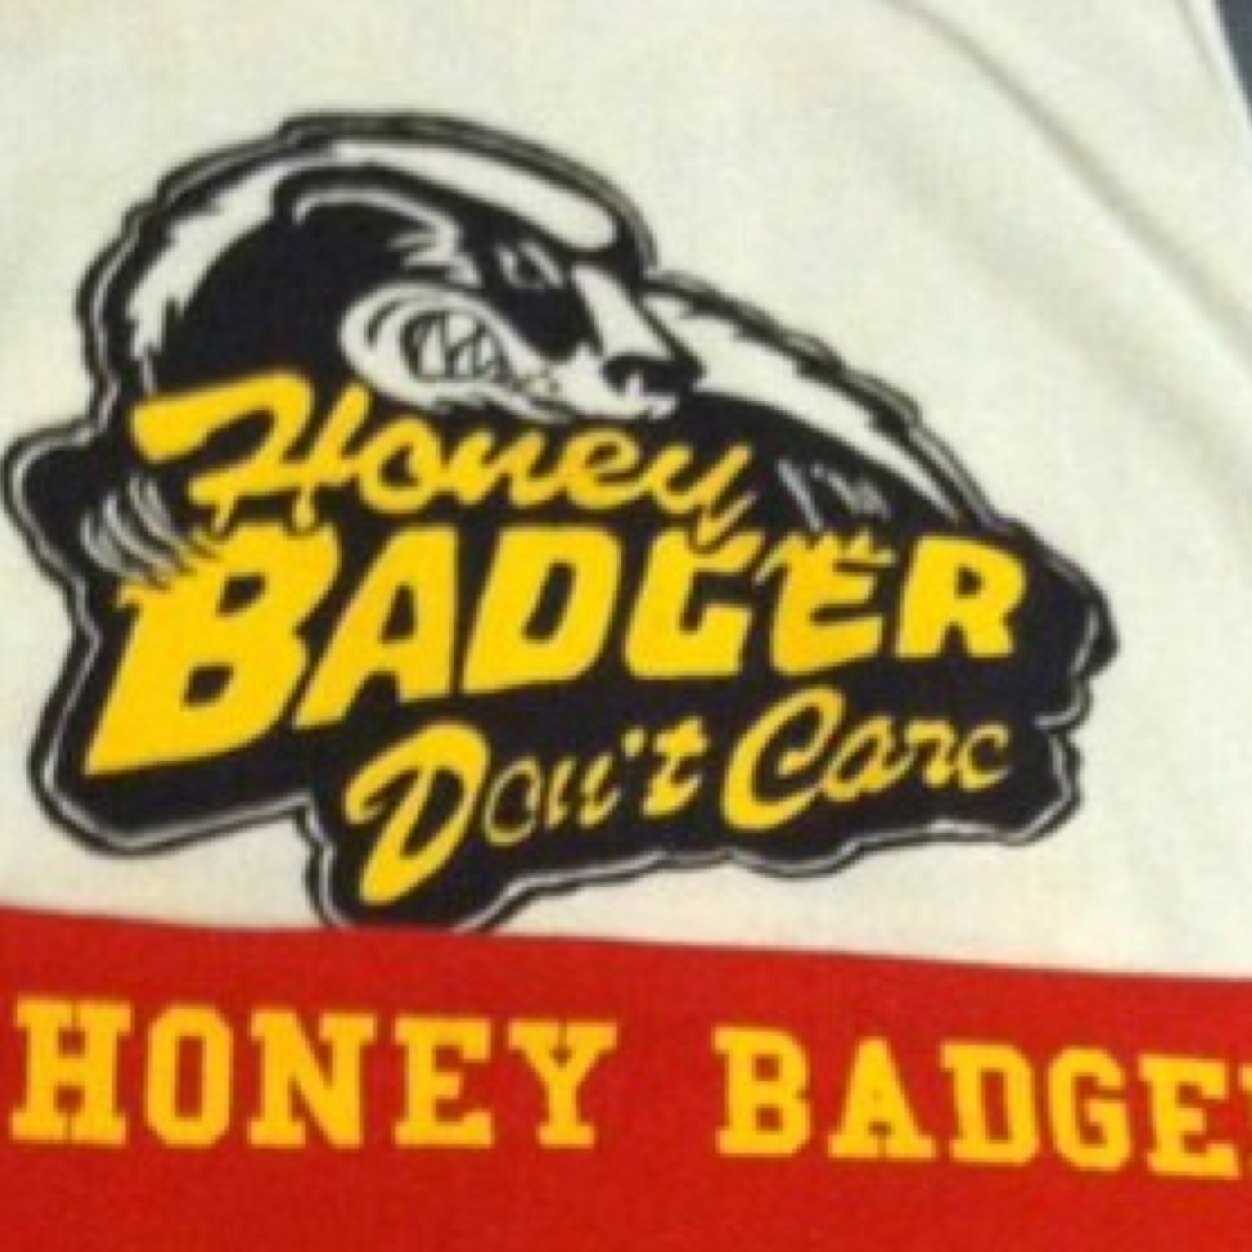 Team HoneyBadgers is a team formed by the two best coaches in 7-on-7 football. Your envy is what fuels our practices. 
#Kobesystem